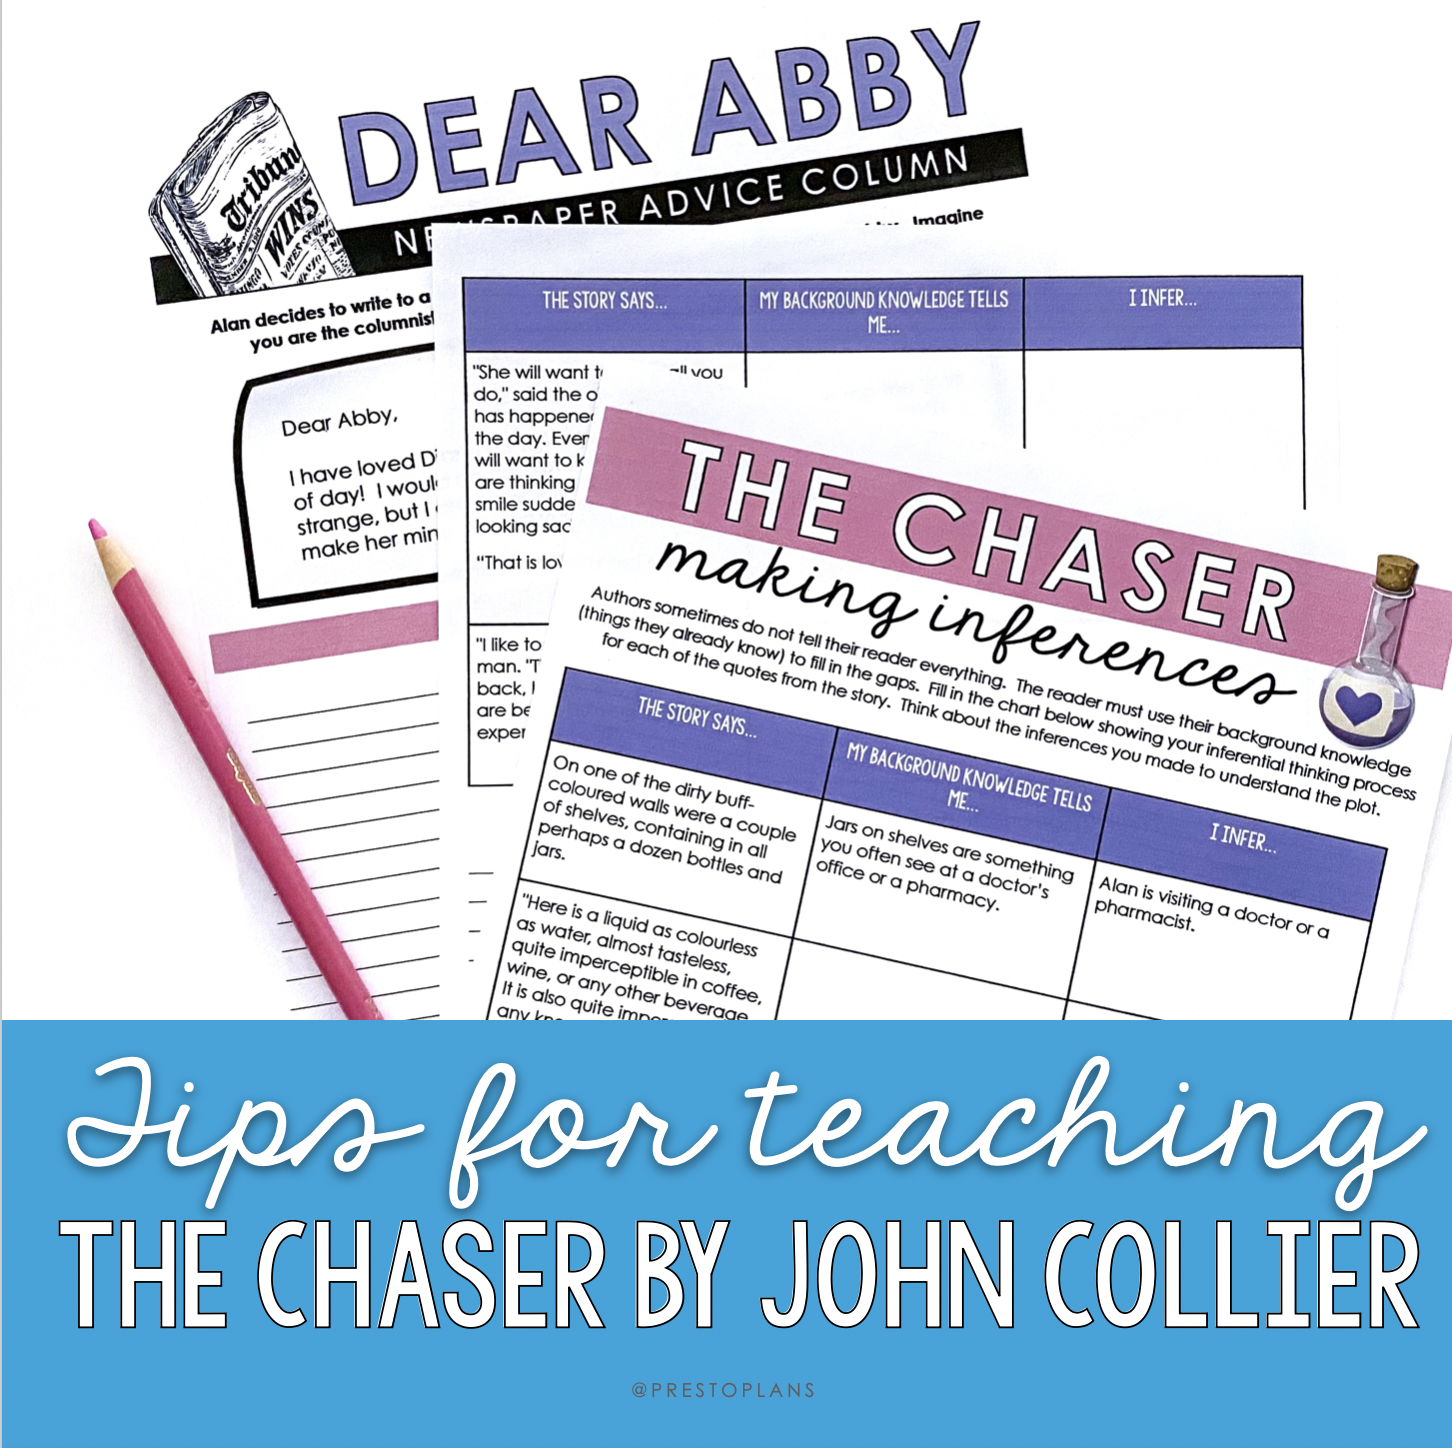 Tips and activities for teaching "The Chaser" by John Collier.